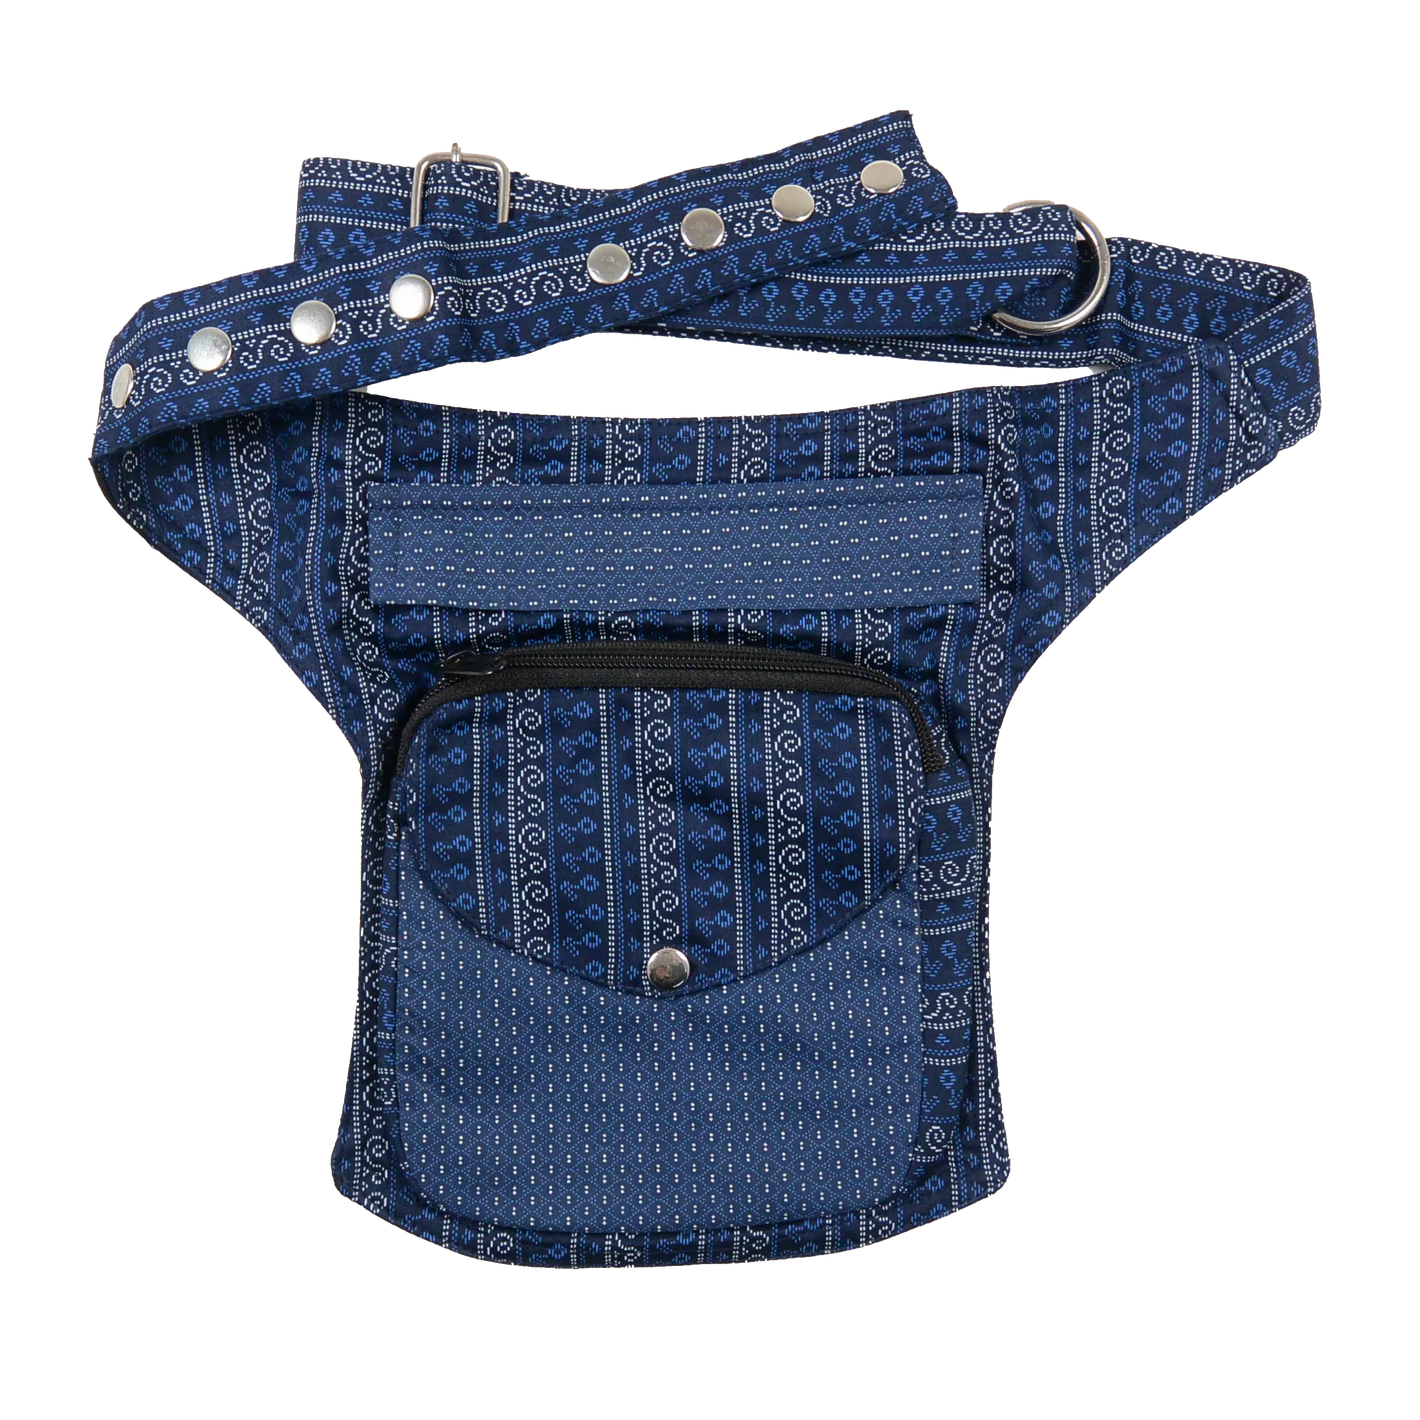 Dog Walking Bag fanny pack S-XXL bag made of fabric in blue NJ-Madrid-218